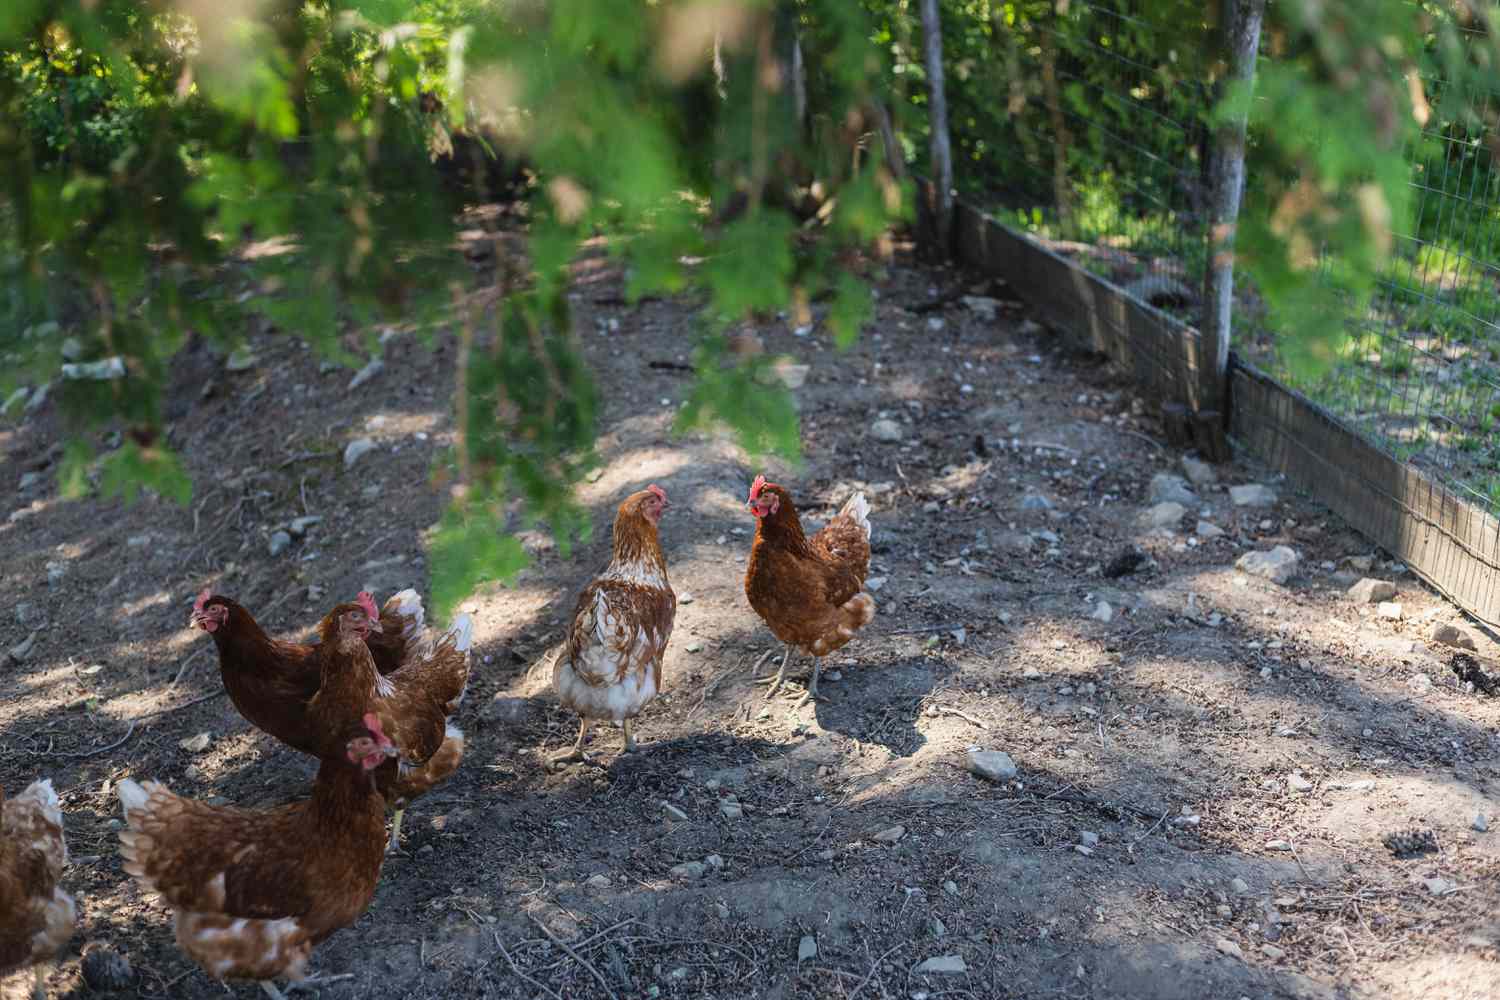 Homesteading with outdoor chicken coop and hens running around